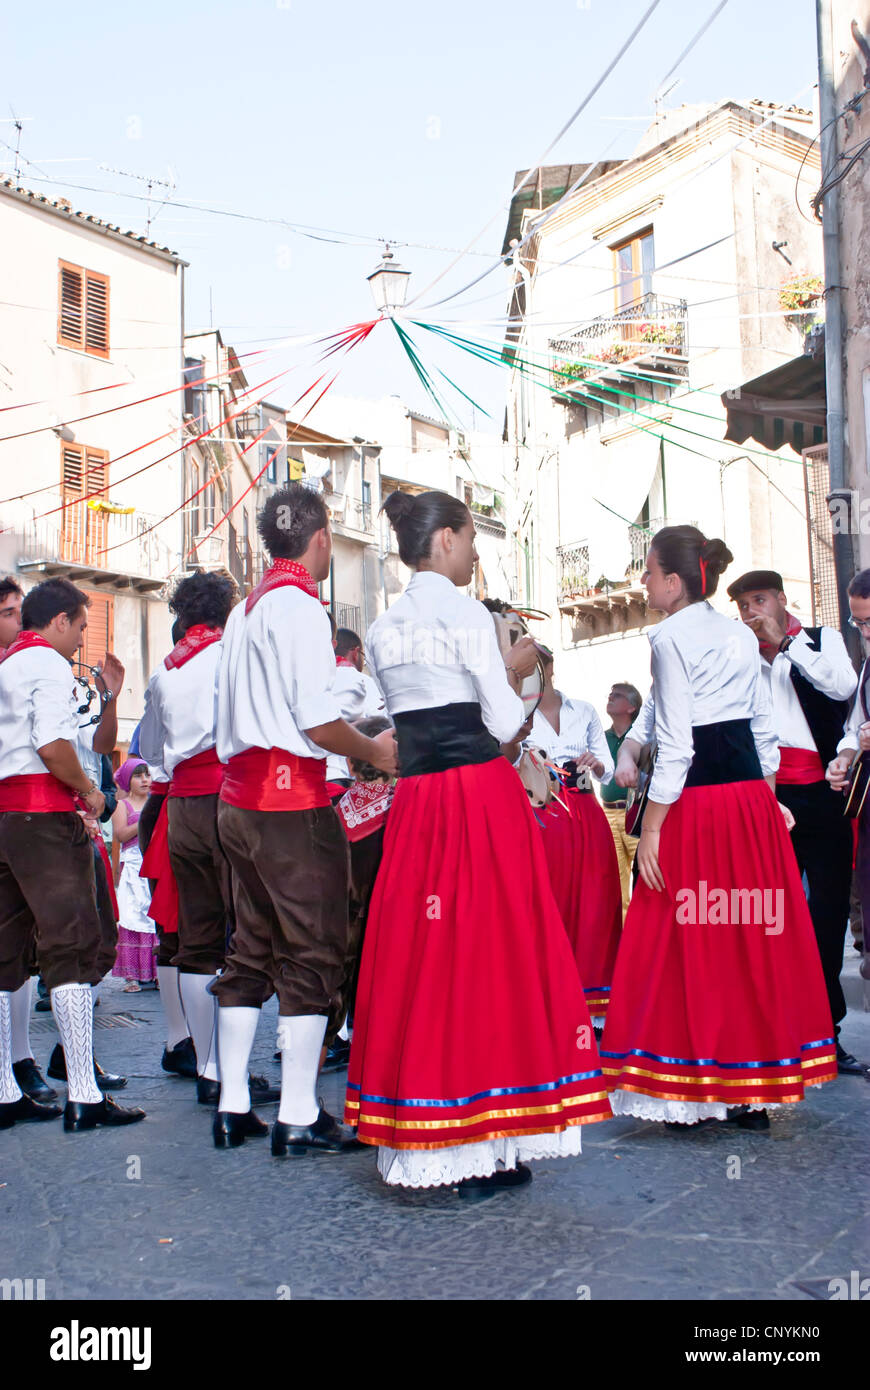 Sicilian folk group from Polizzi G. at the International "Festival of hazelnuts",dance and parade through the city Stock Photo